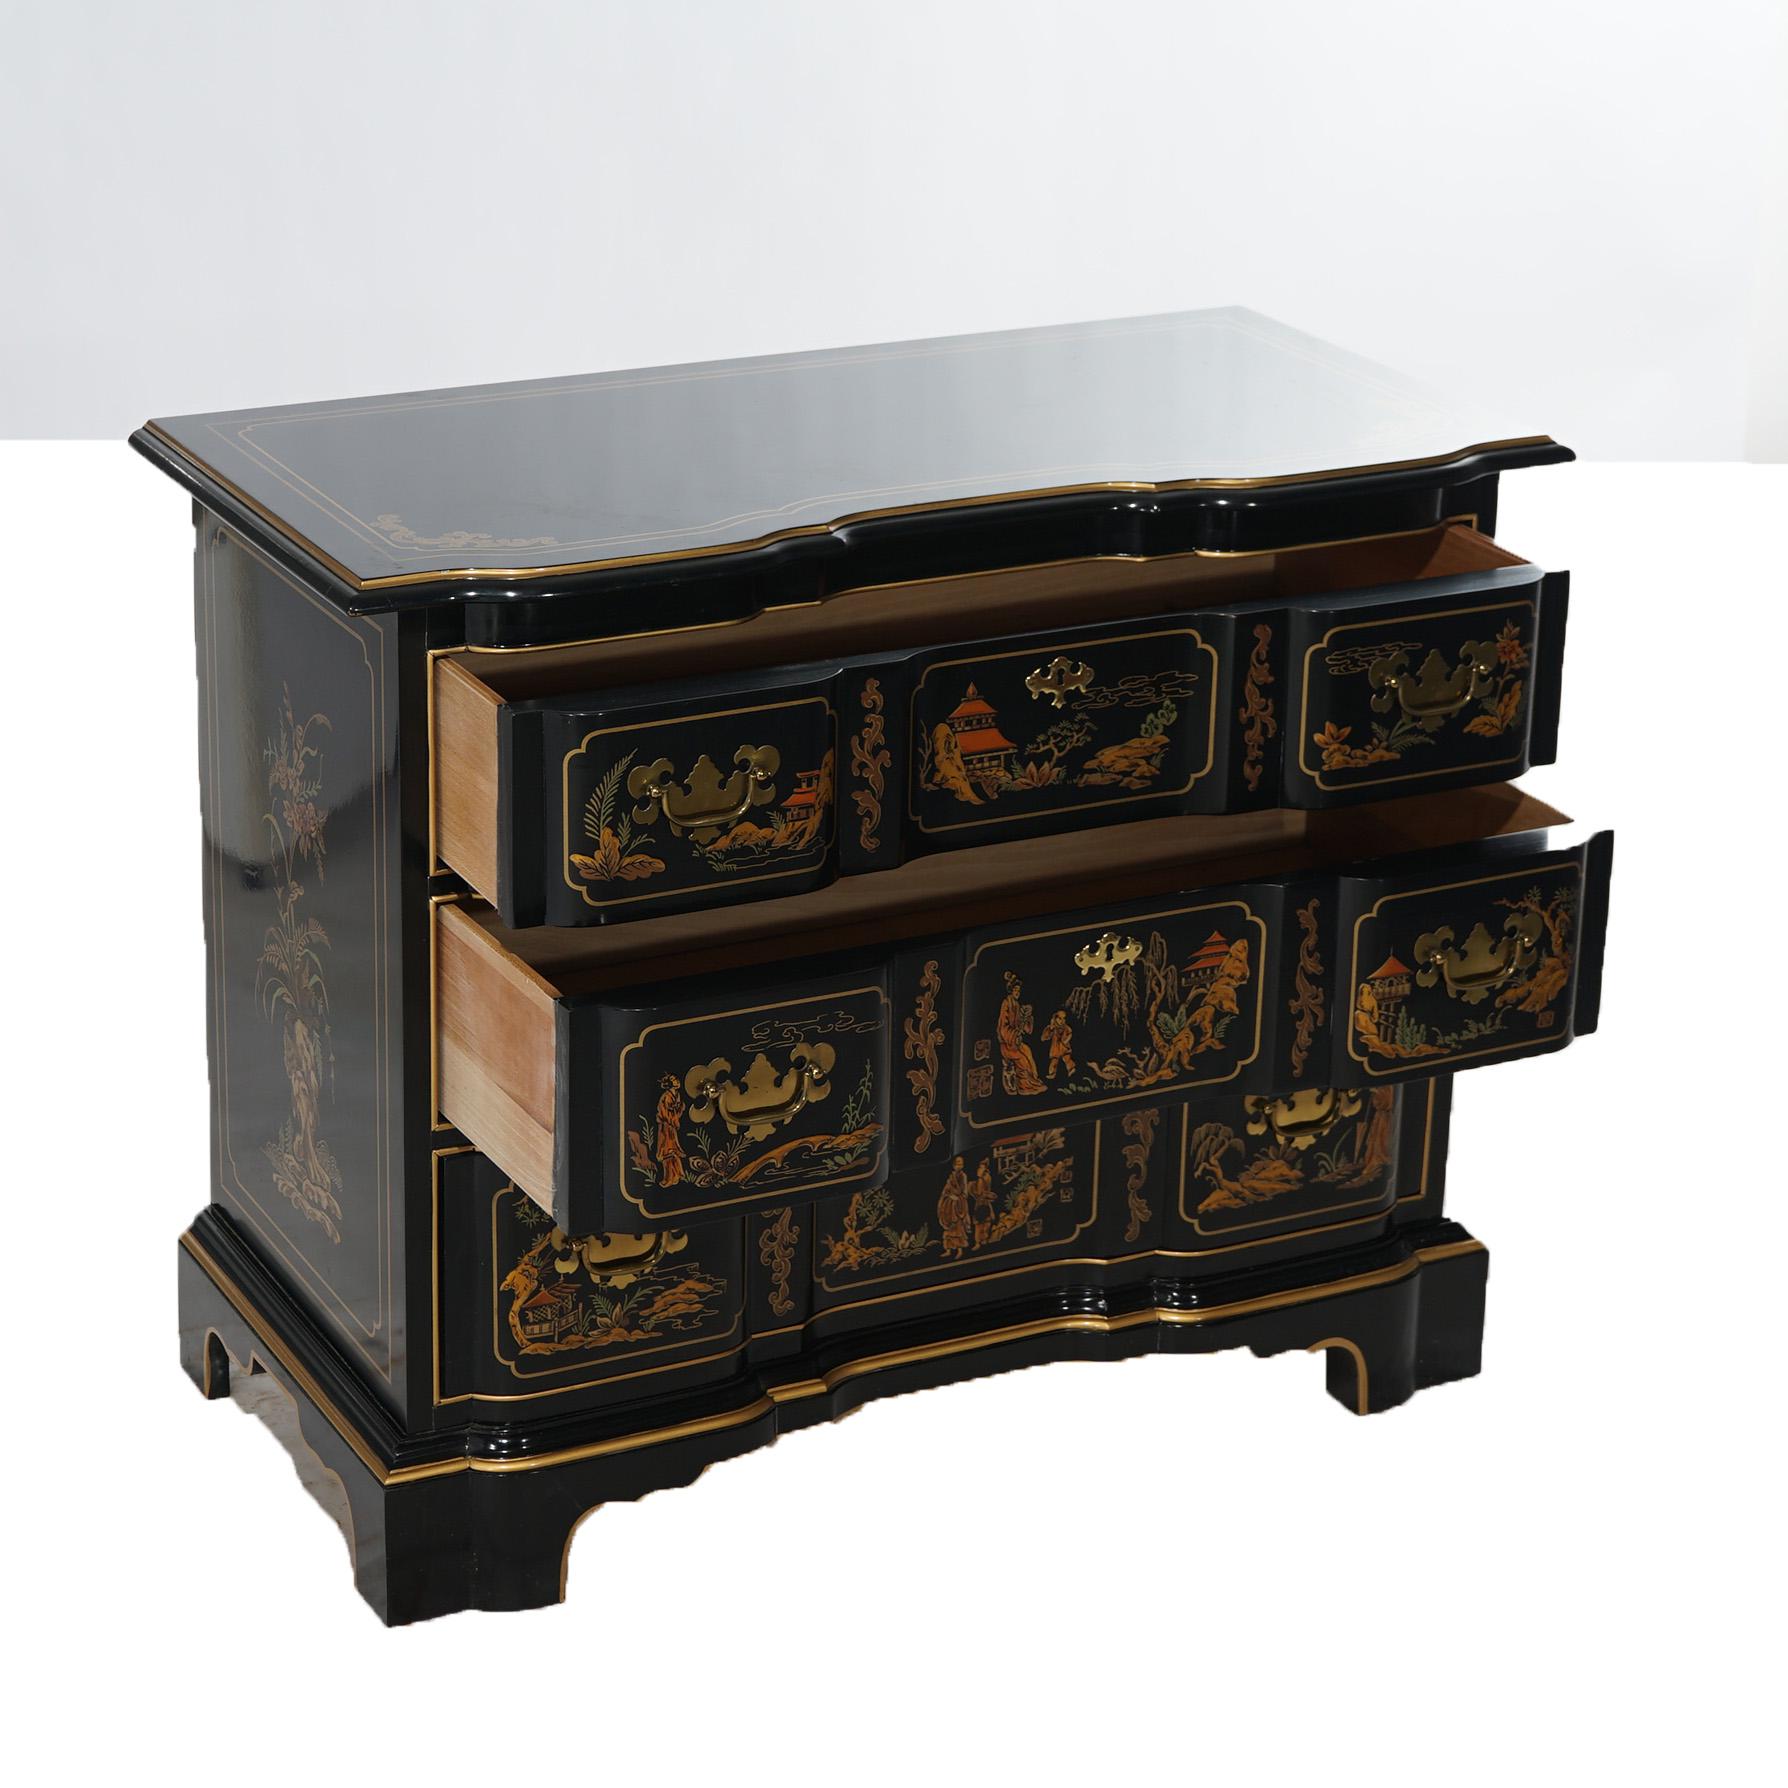 An antique Chippendale chest by Drexel offers block front form with black lacquered finish, Chinoiserie decorated with figures and landscape scenes, three long drawers, gilt highlights throughout and raised on bracket feet, 20th century

Measures-